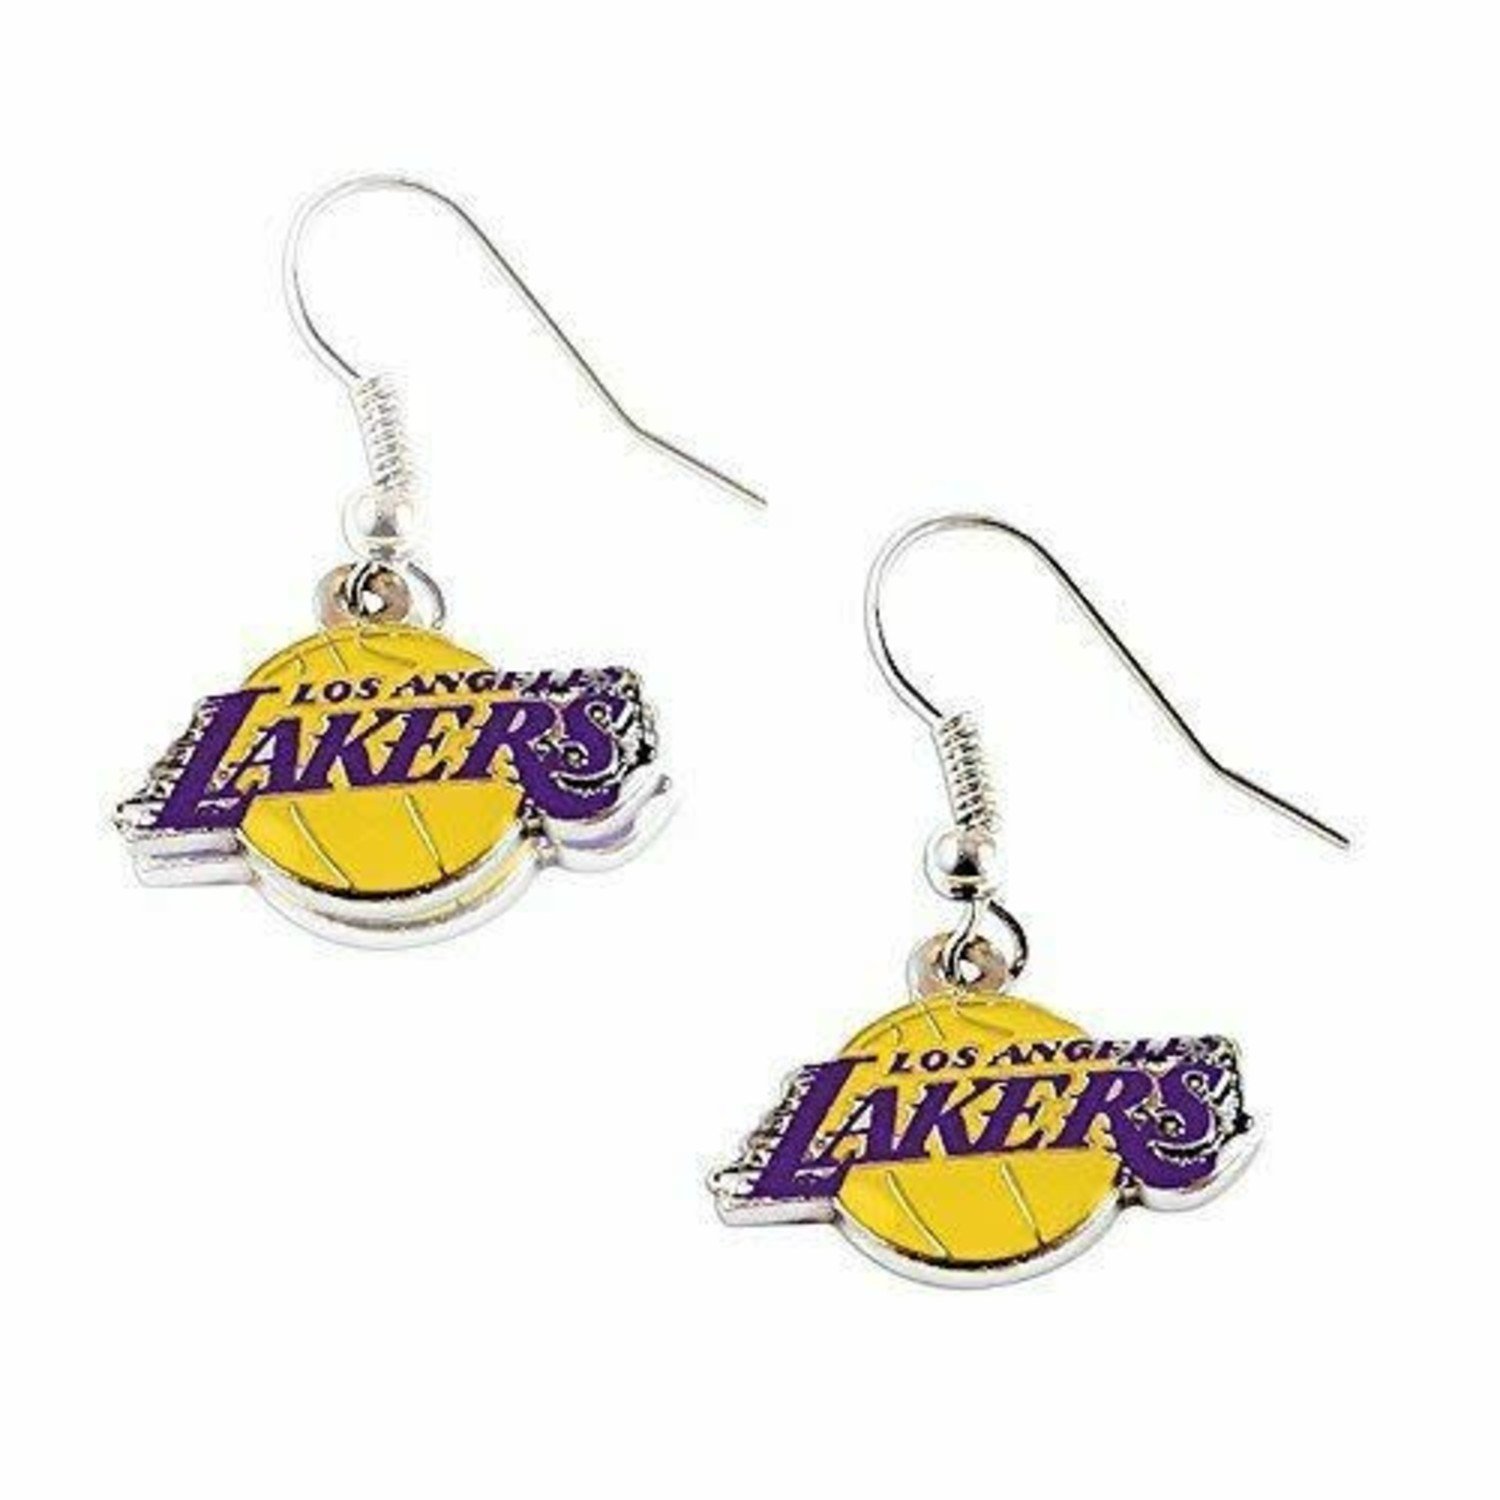 Los Angeles Lakers Ladies Accessories, Lakers Gifts, Jewelry